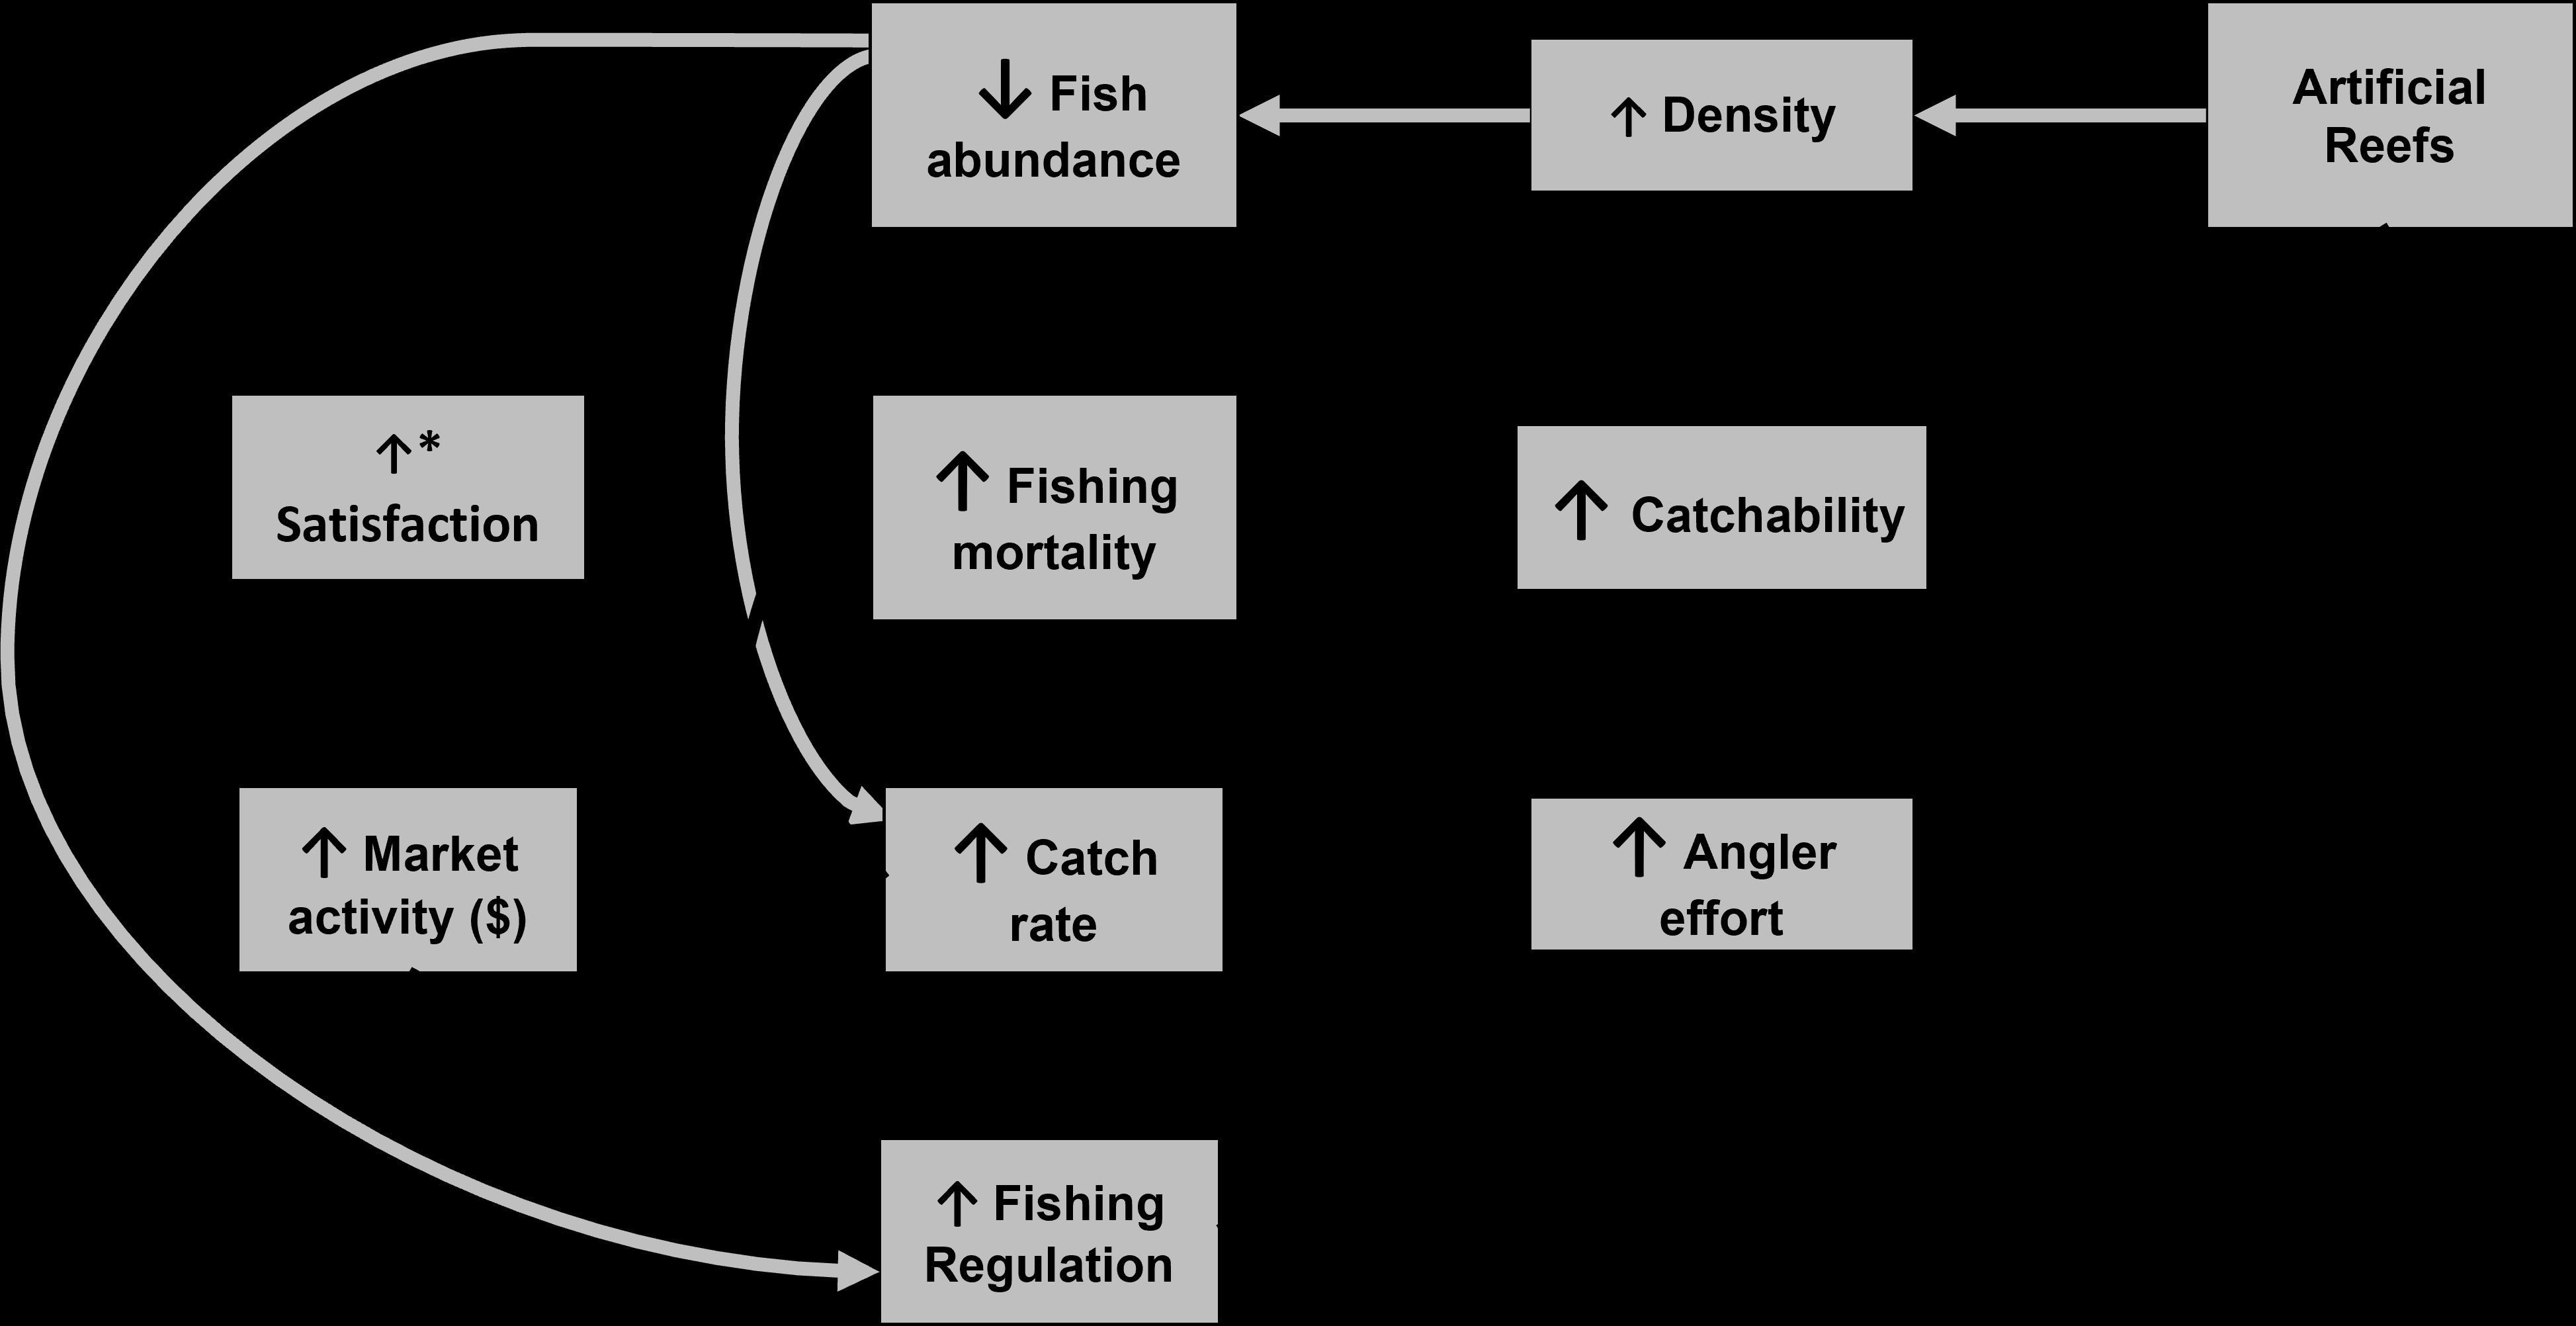 Example of how artificial reefs can attract fish without increasing overall fish abundance and increase effort and catchability. This would result in greater catch rates initially. However, this may lead to increases in fishing mortality, which would decrease fish abundance and possibly lead to stricter fishing regulations. The grey arrows are fish effects, and the black arrows are fisher effects. The up arrows in the boxes show an increase in a metric and the down arrow shows a decrease in a metric. The up arrow in satisfaction has an asterisk because this increase in satisfaction may be temporary until stricter regulations are imposed in the future.